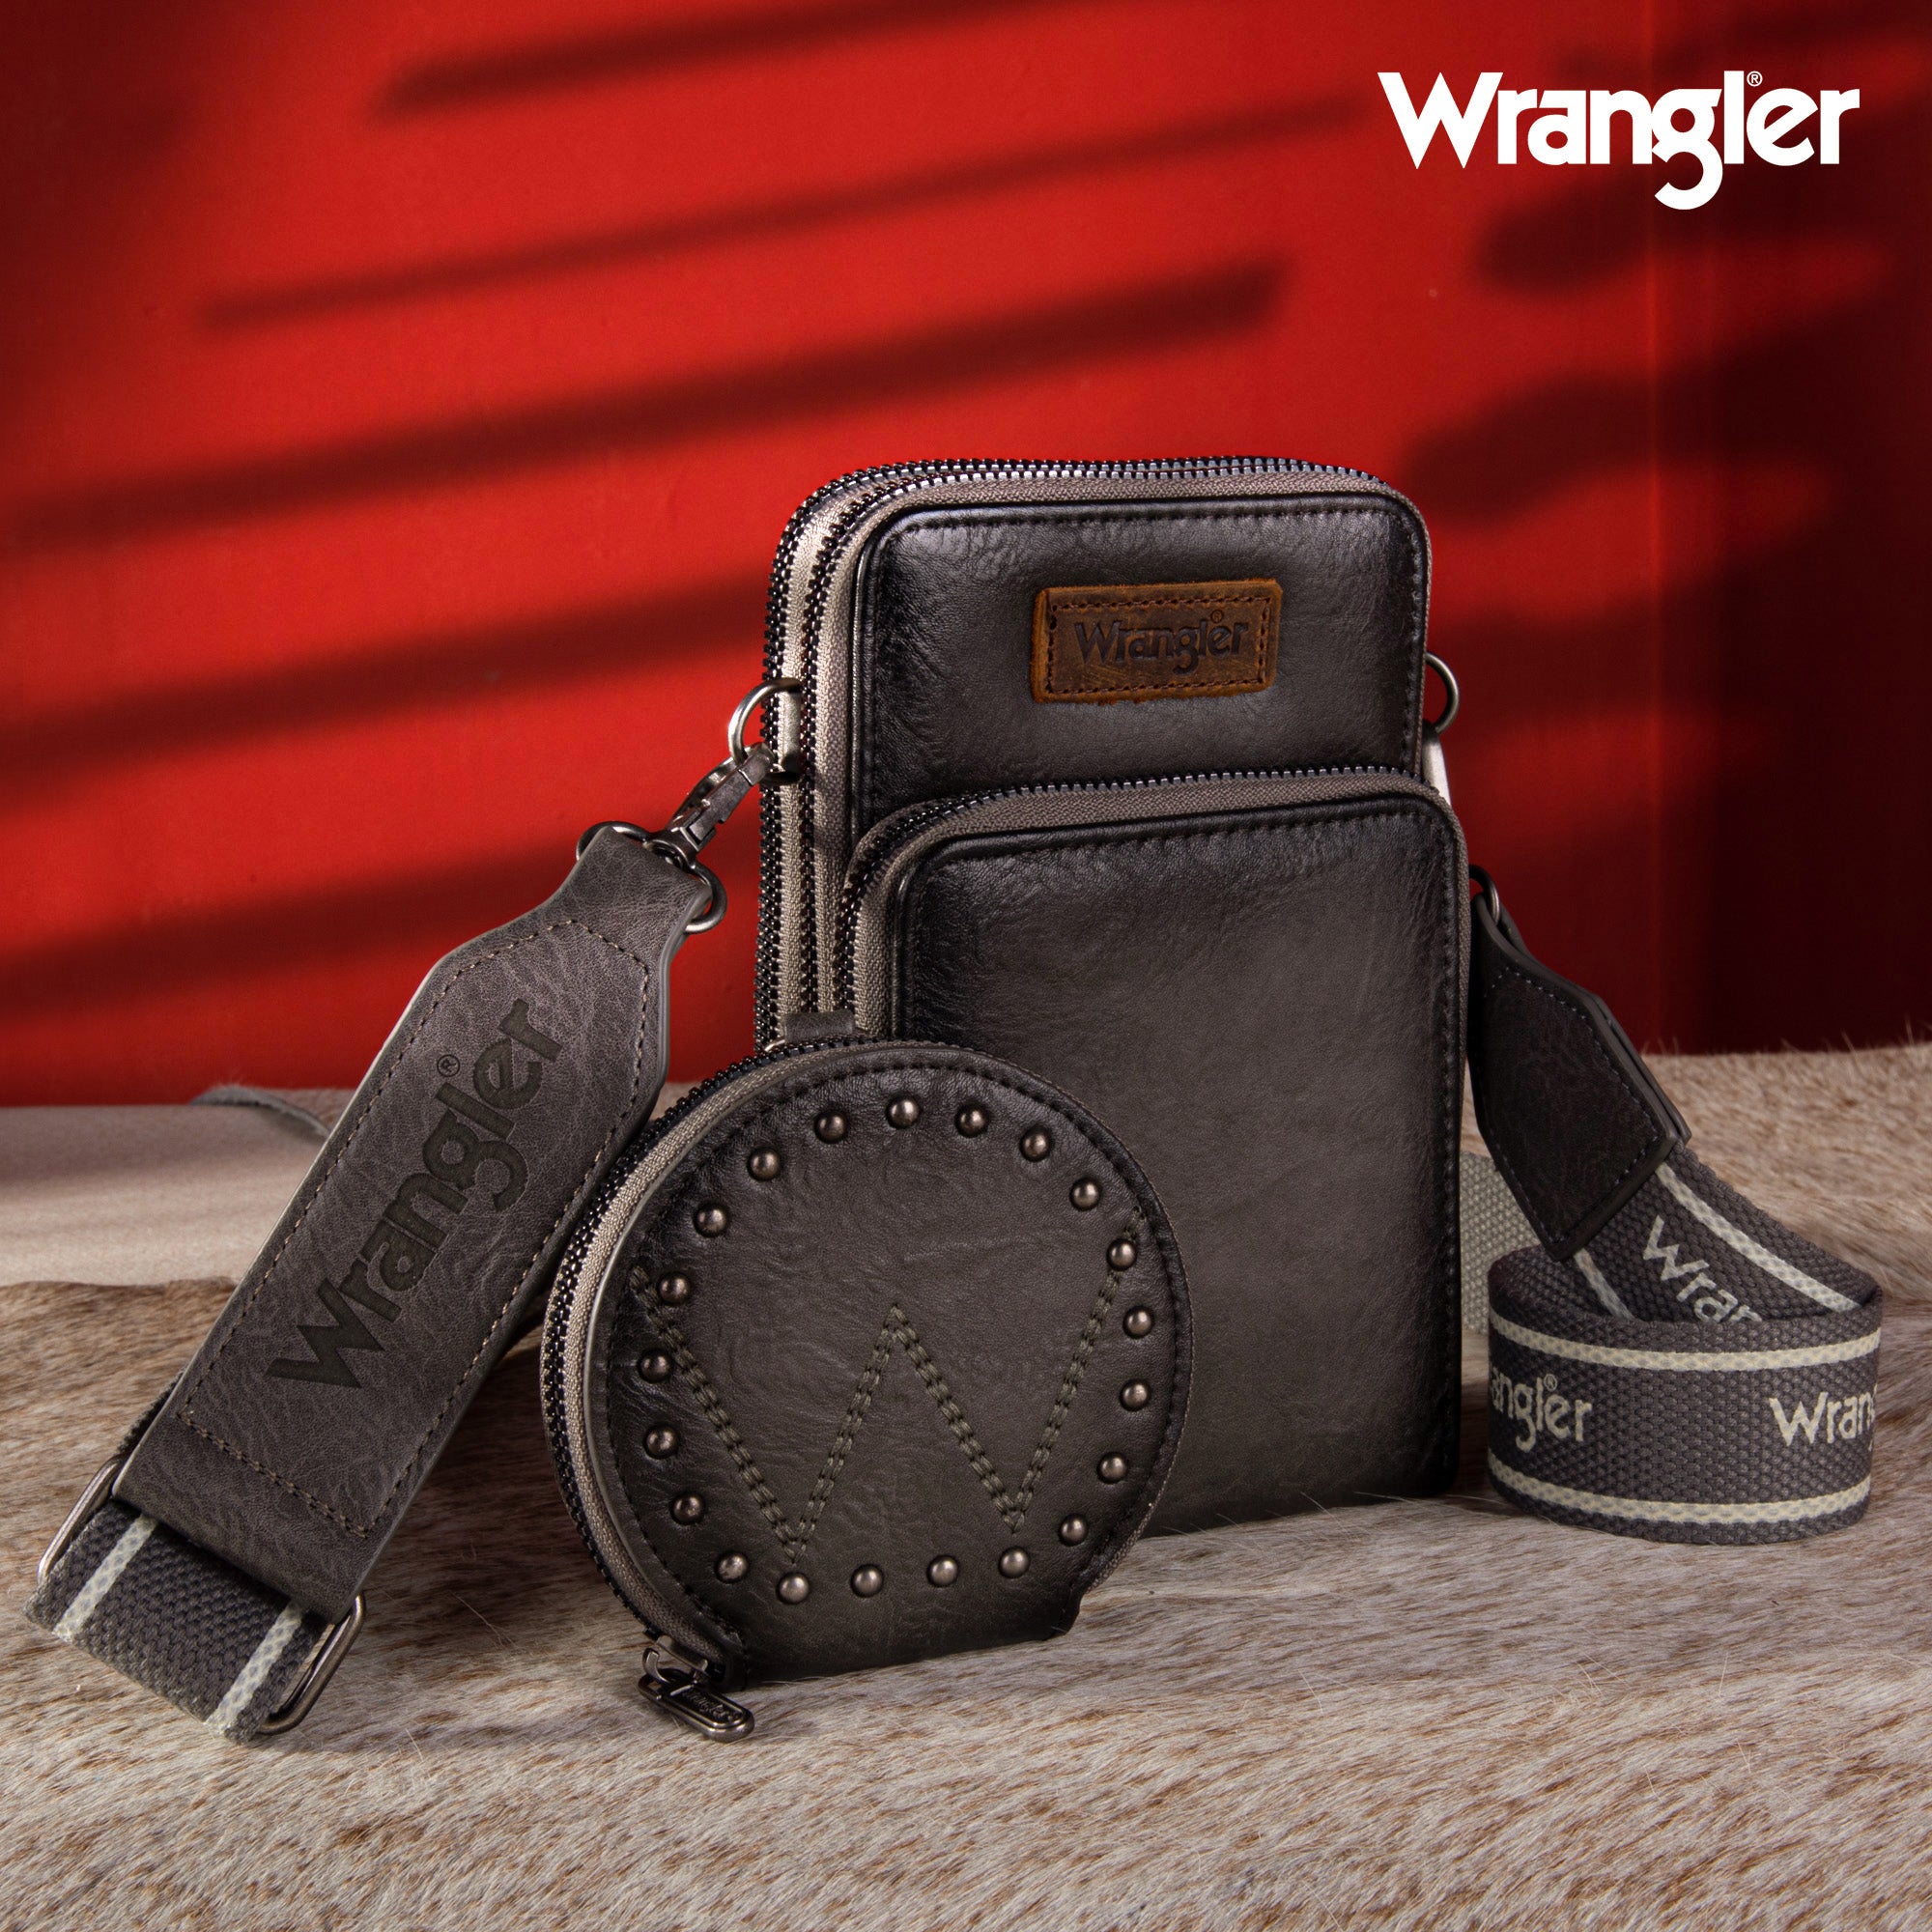 Wrangler Small Crossbody Purse 3 Zippered Compartment with Coin Pouch - Cowgirl Wear